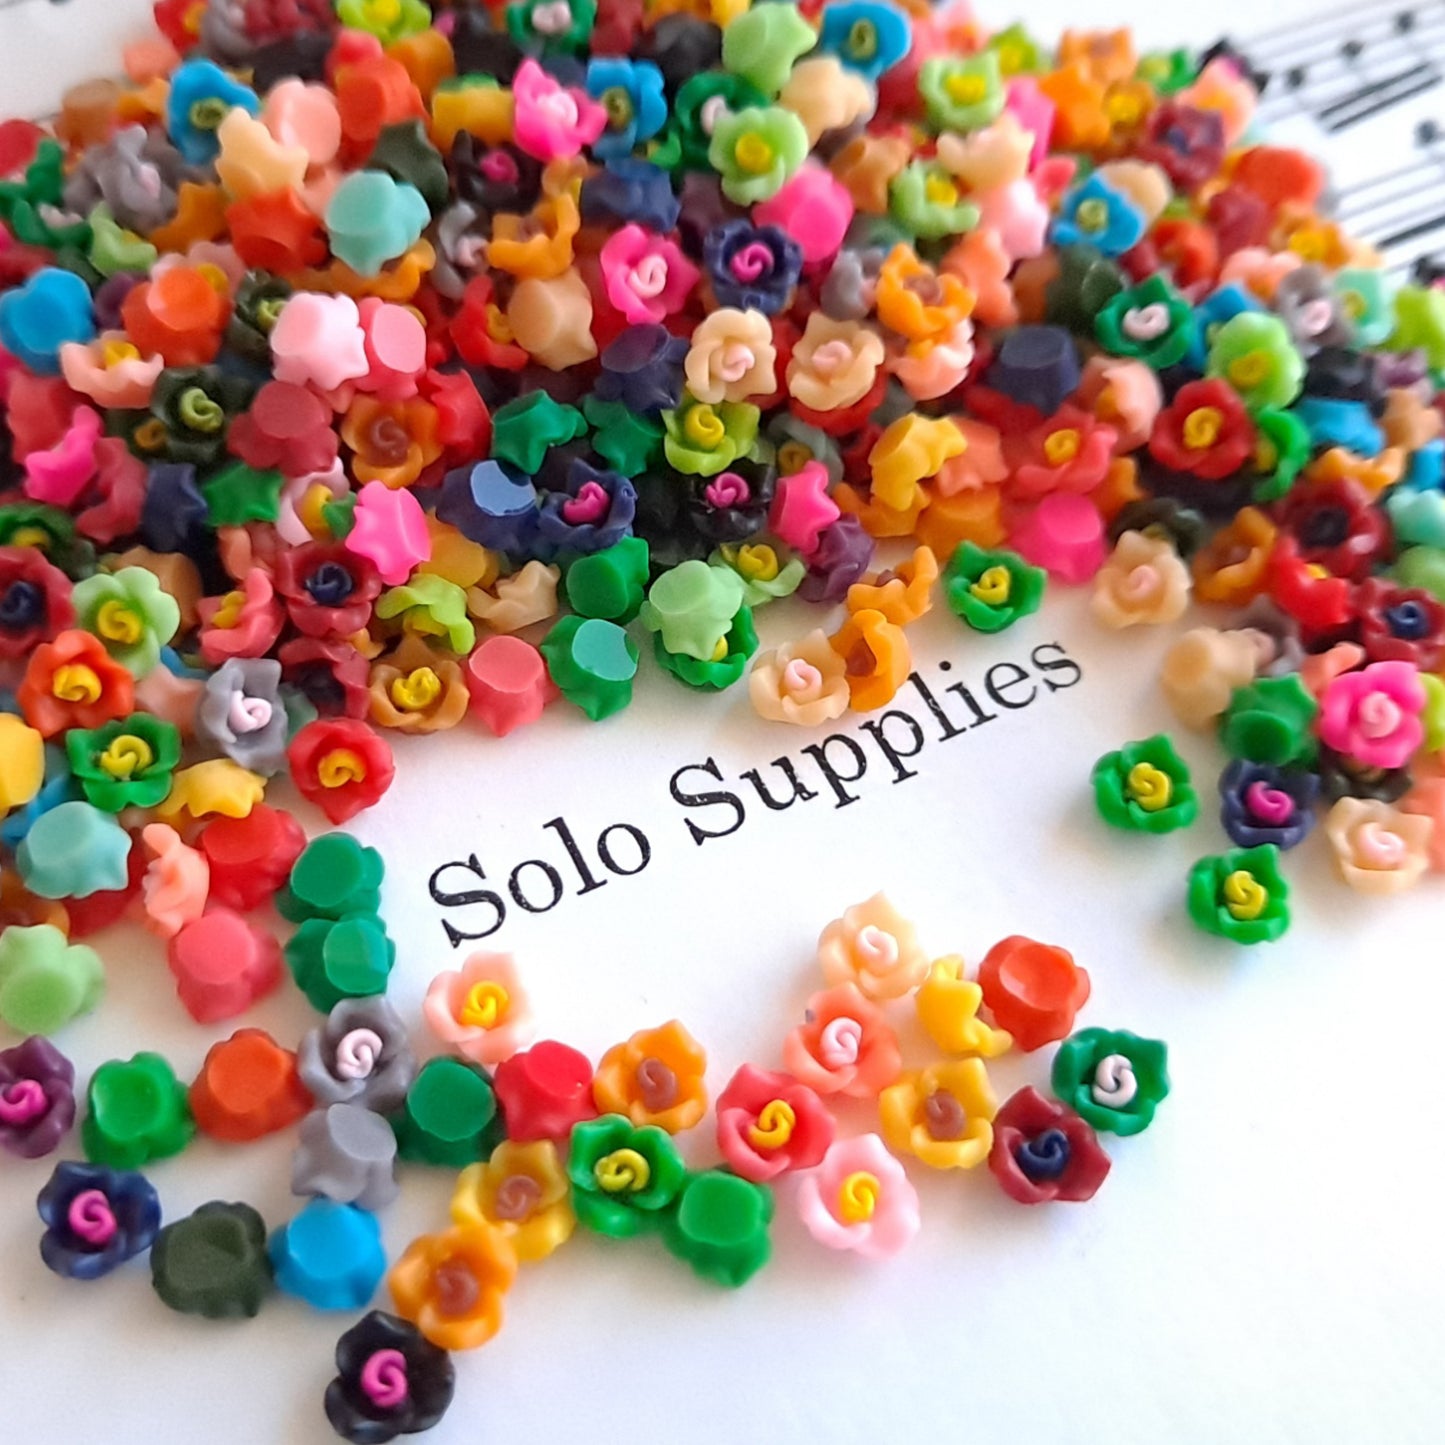 Tiny 5.5mm to 6mm Flower Cabochons, Colorful Autumn Mix Resin Flatbacks